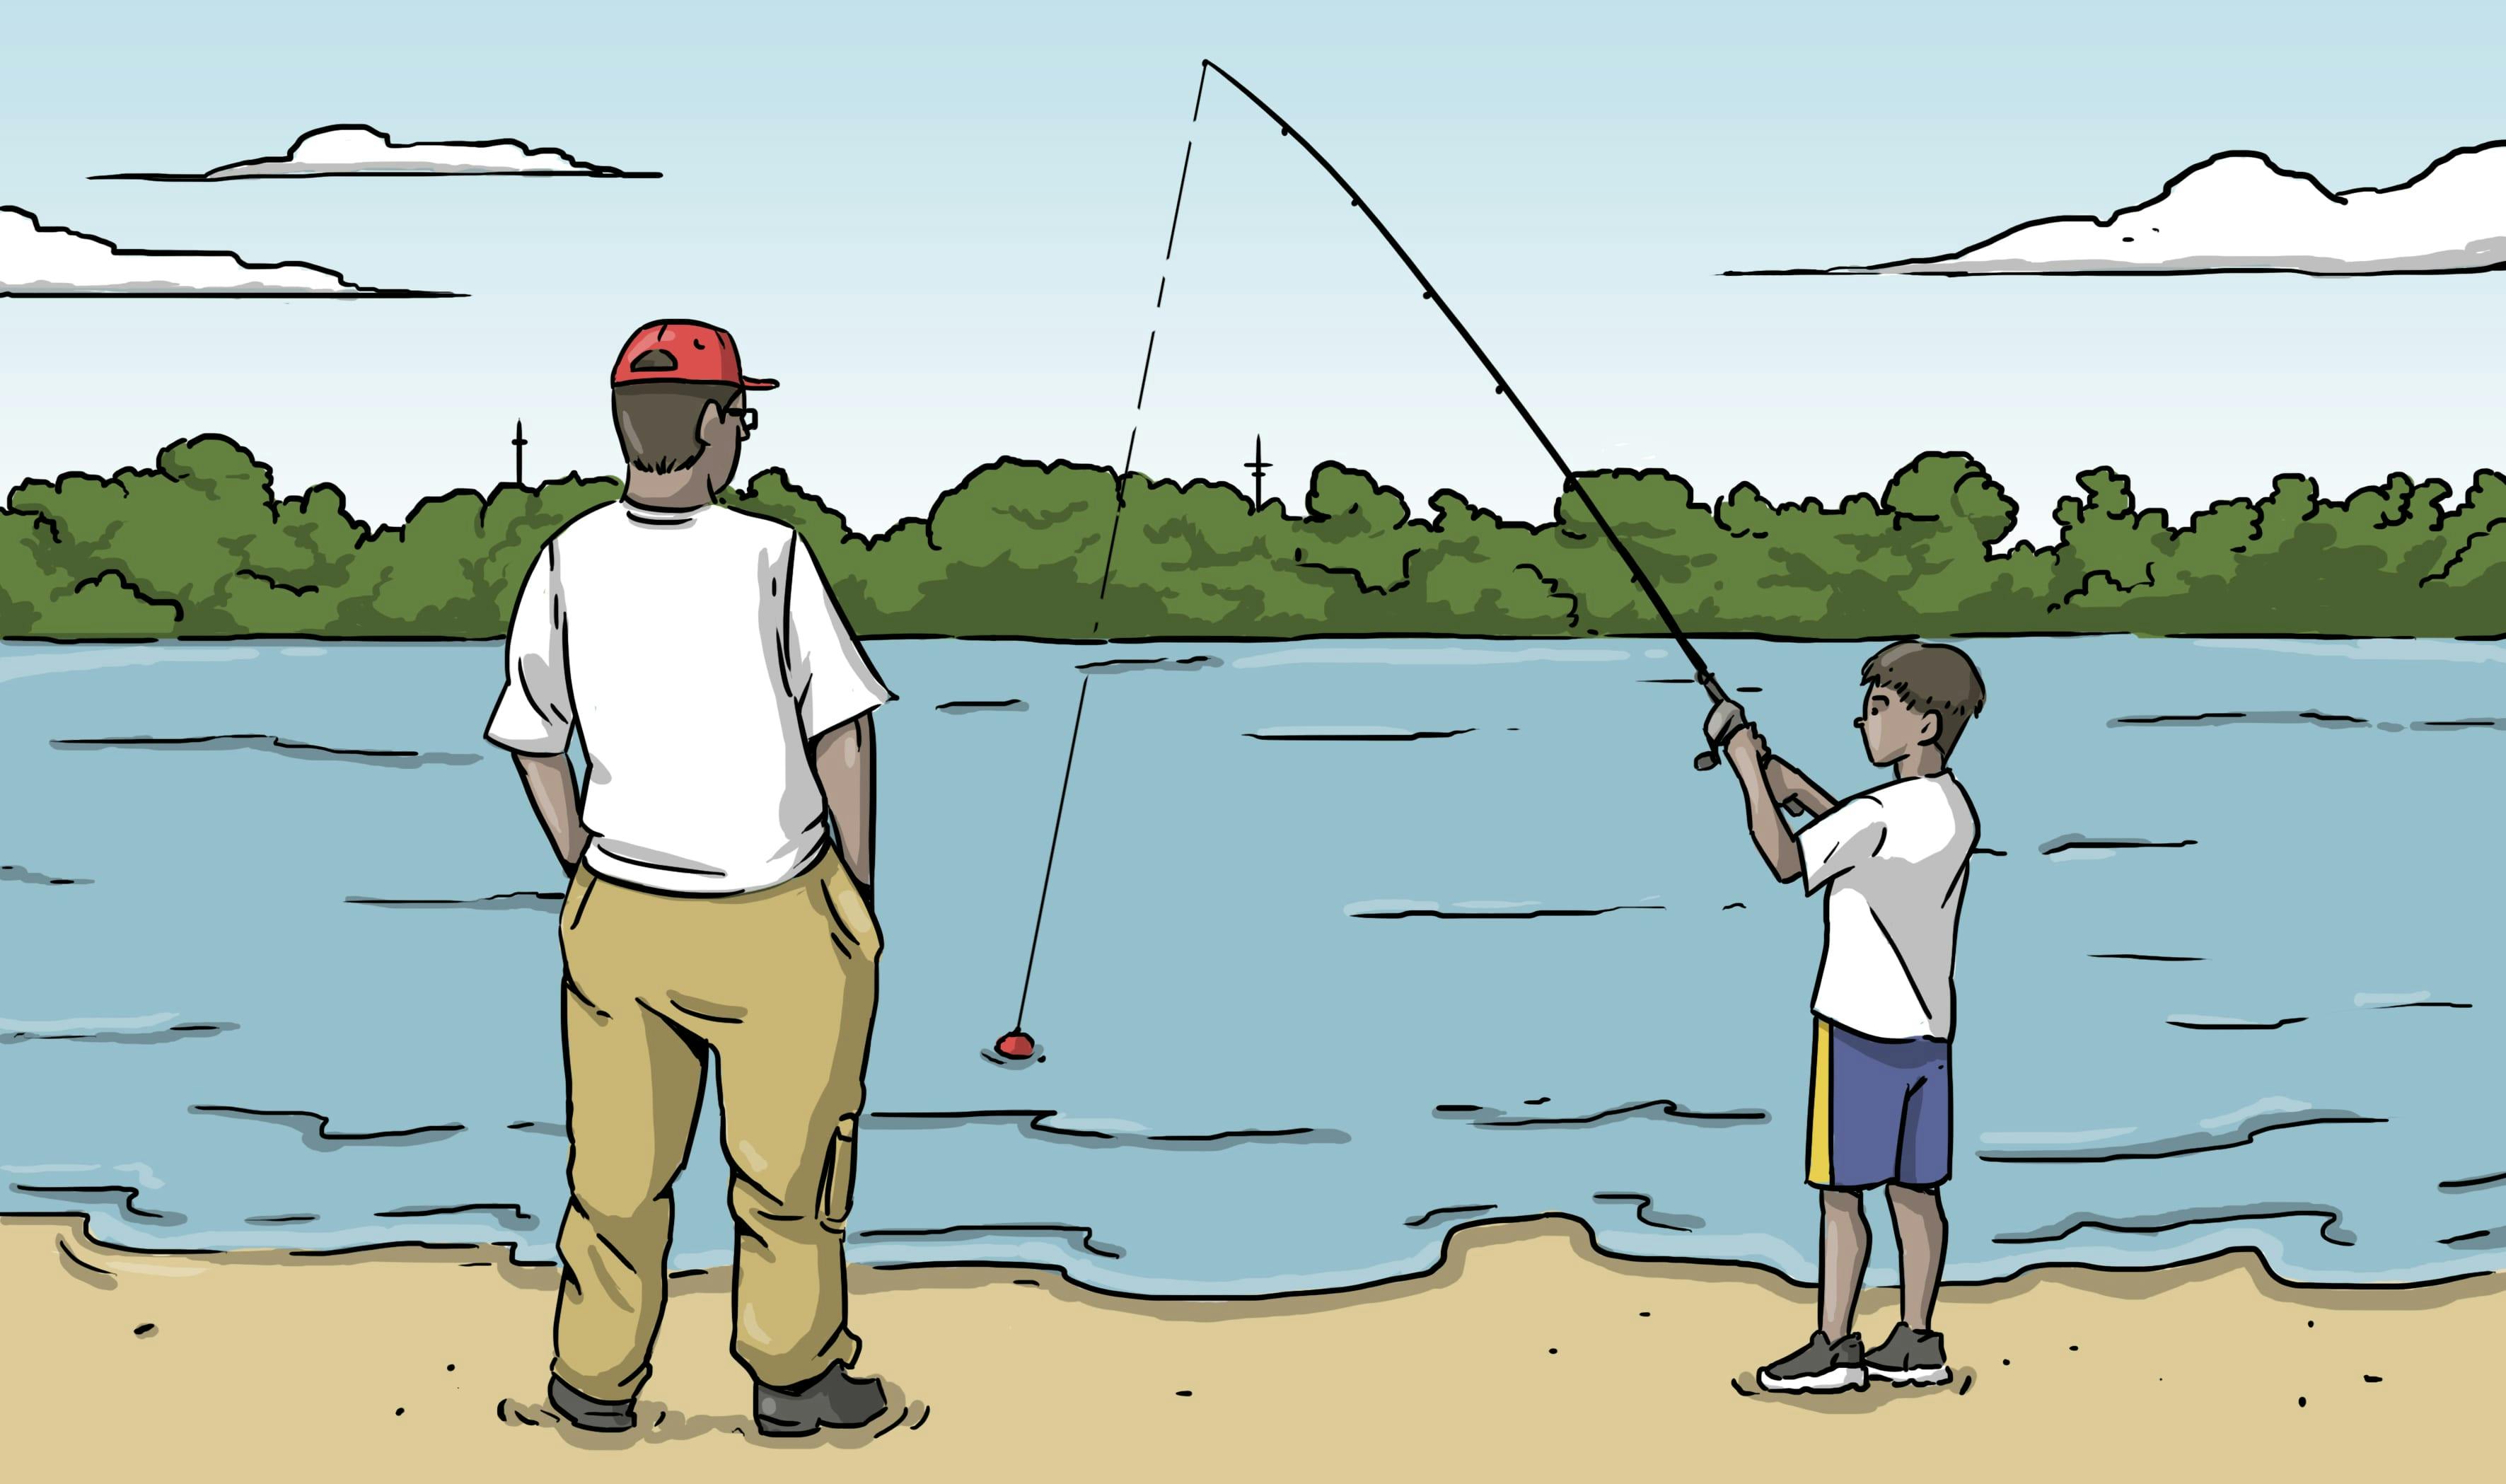 A son learning how to fish from his father.